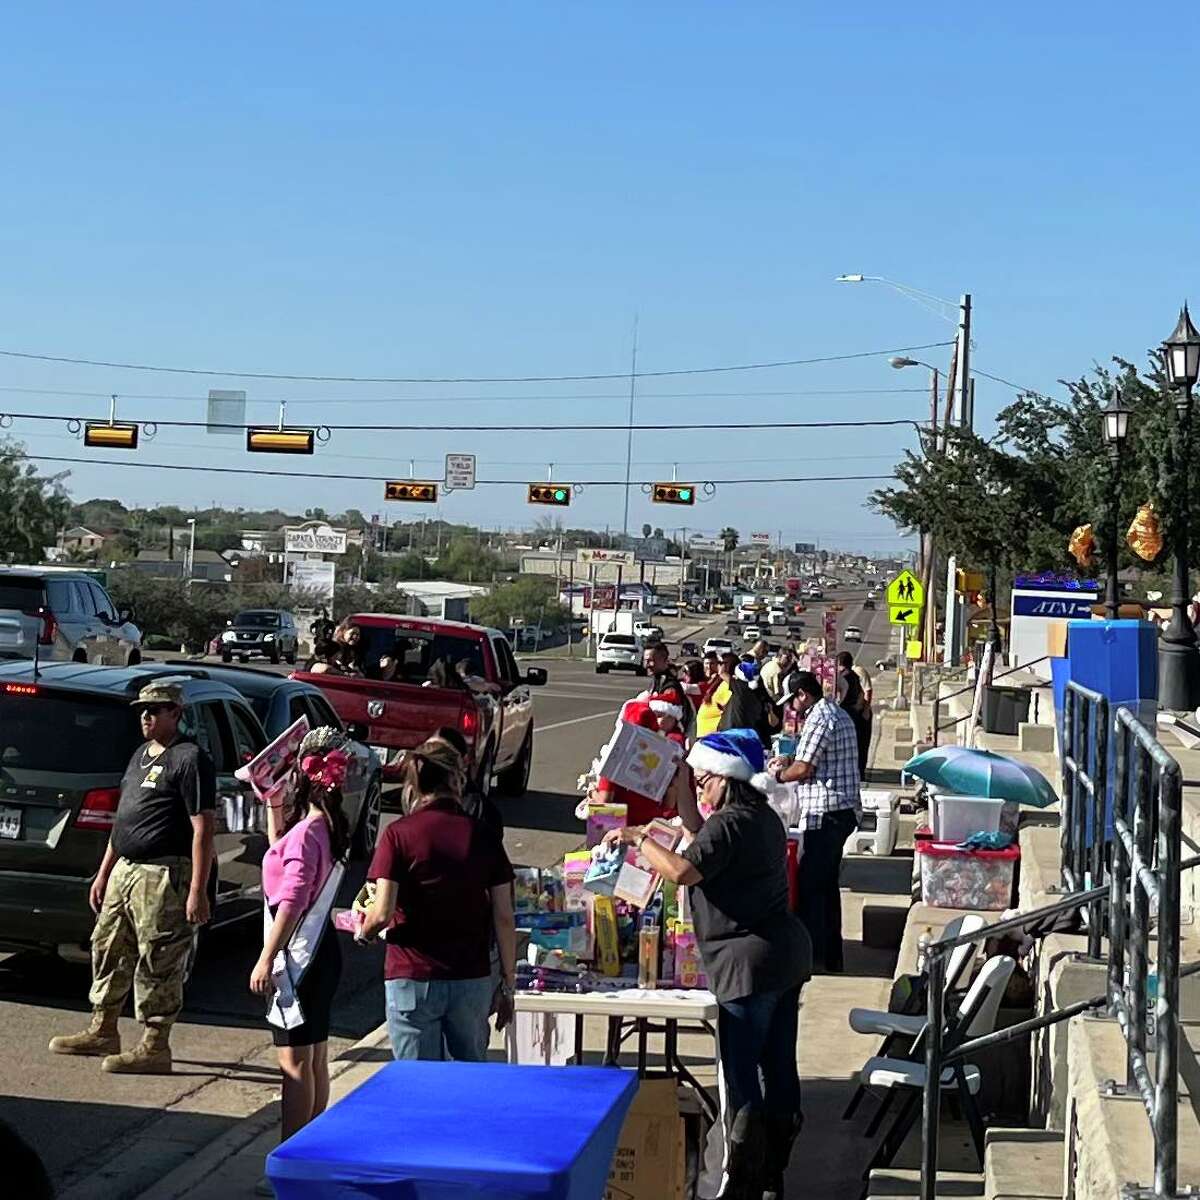 The Zapata County Sheriff's Office distributed 700 toys to families in the area on Thursday, Dec. 22, 2022 as part of Operation Blue Santa..